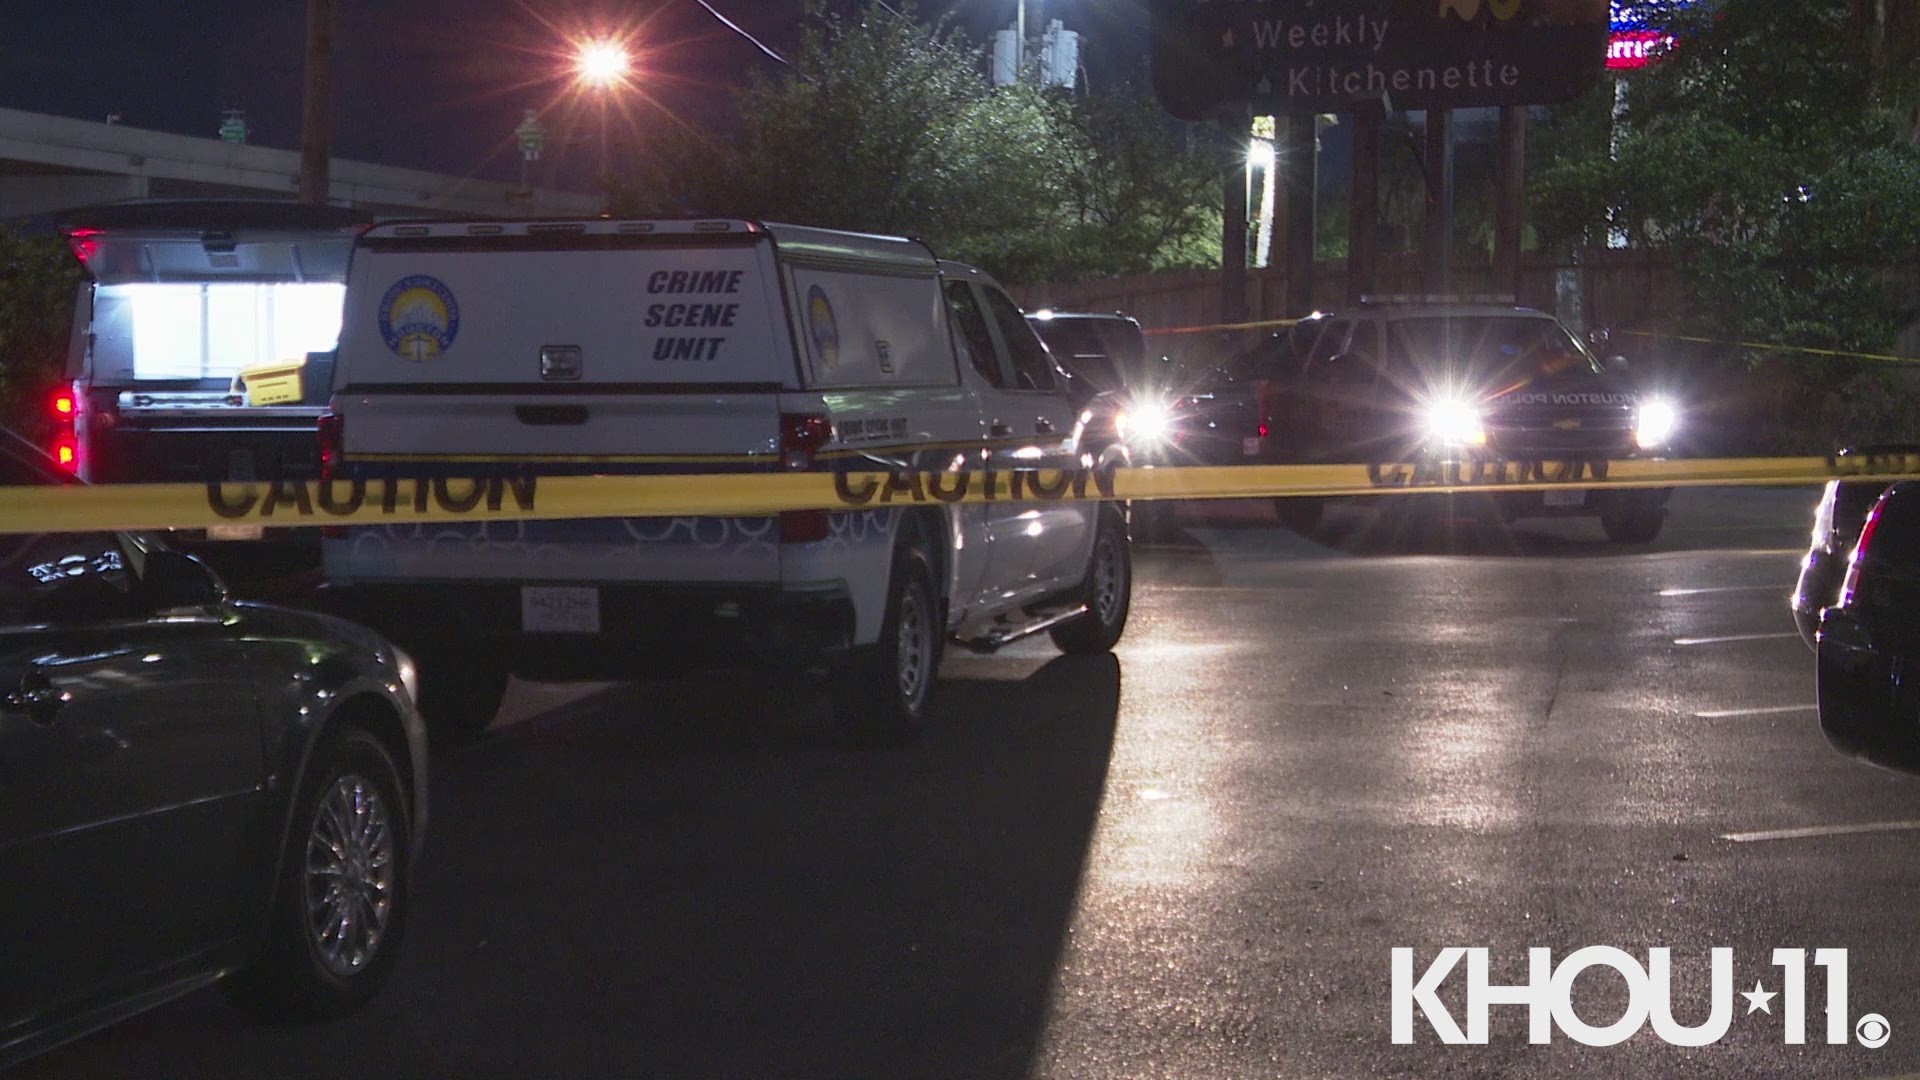 Houston police are investigating a shooting that left one man dead at a motel Friday night in southeast Houston.